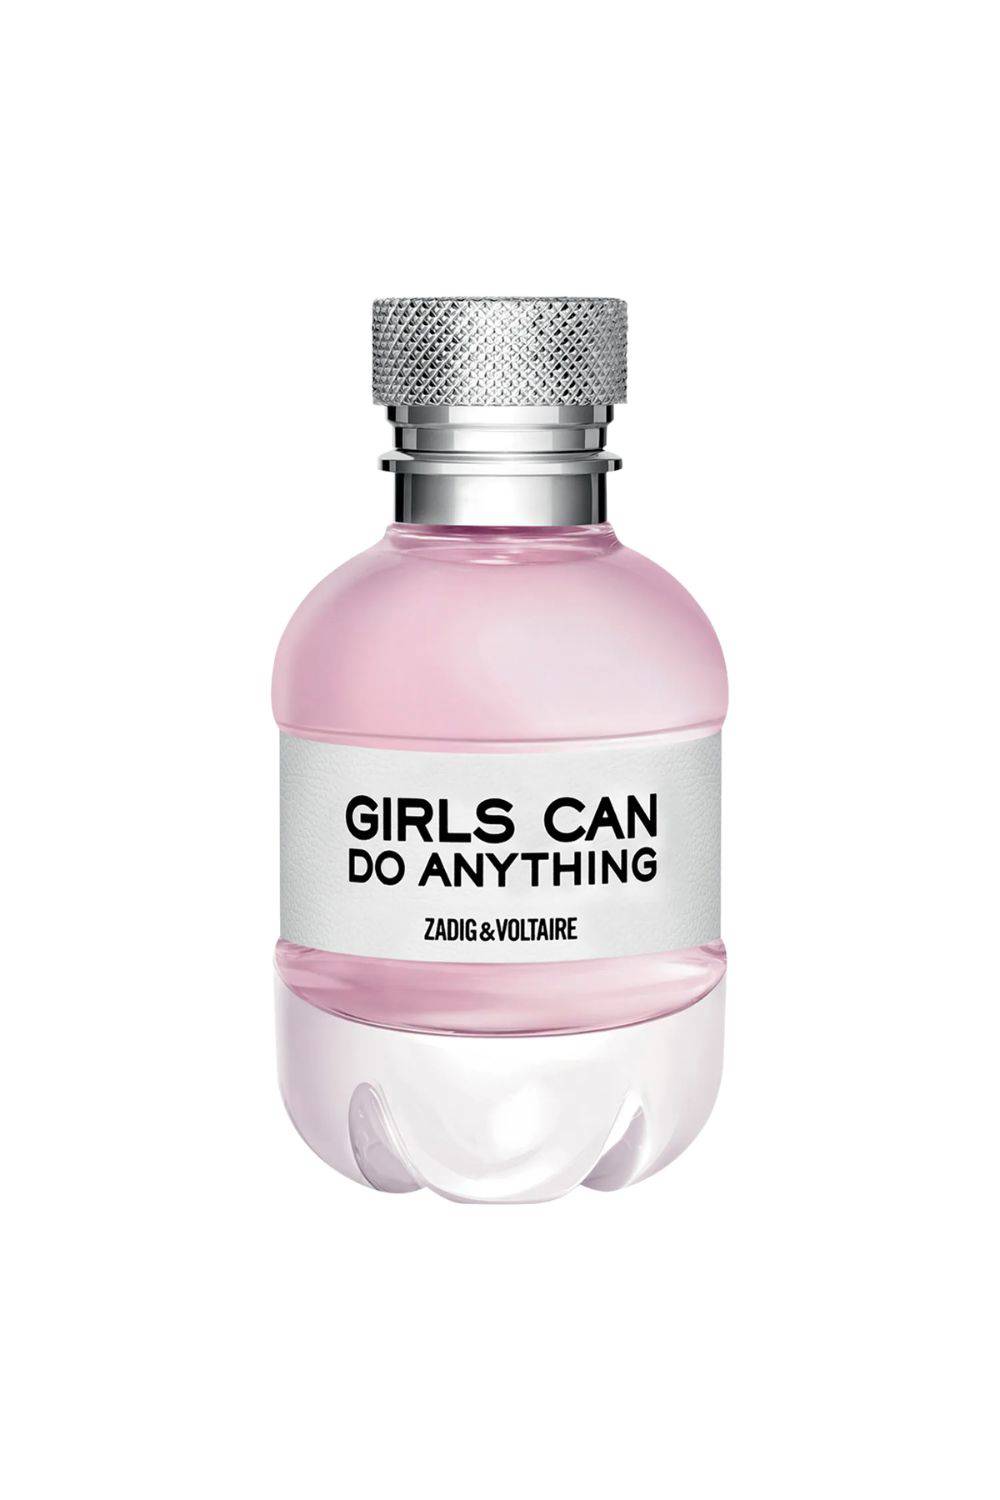 Girls Can Do Anything de ZADIG & VOLTAIRE